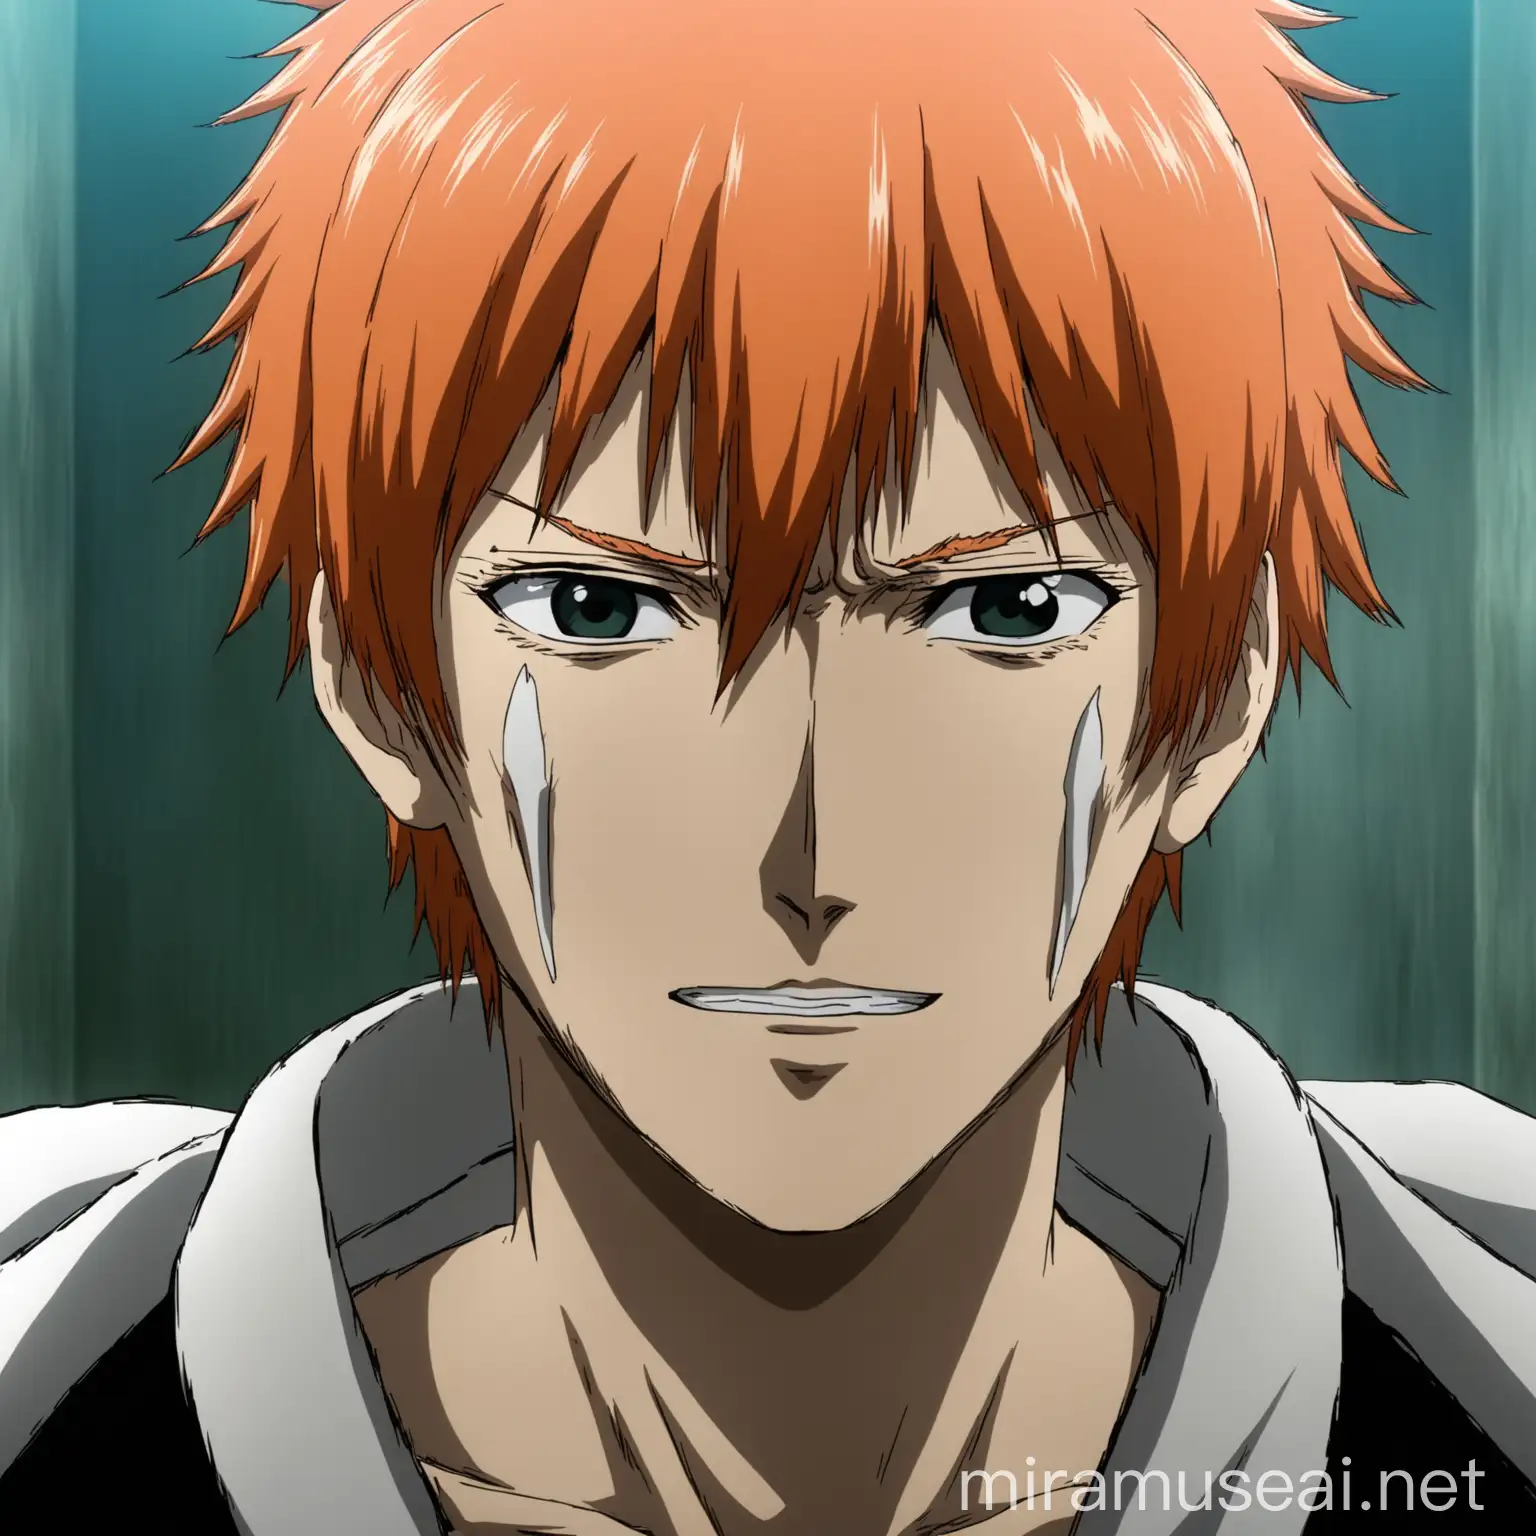 Image of Ichigo's face, from the anime Bleach, frontal image, facing the camera